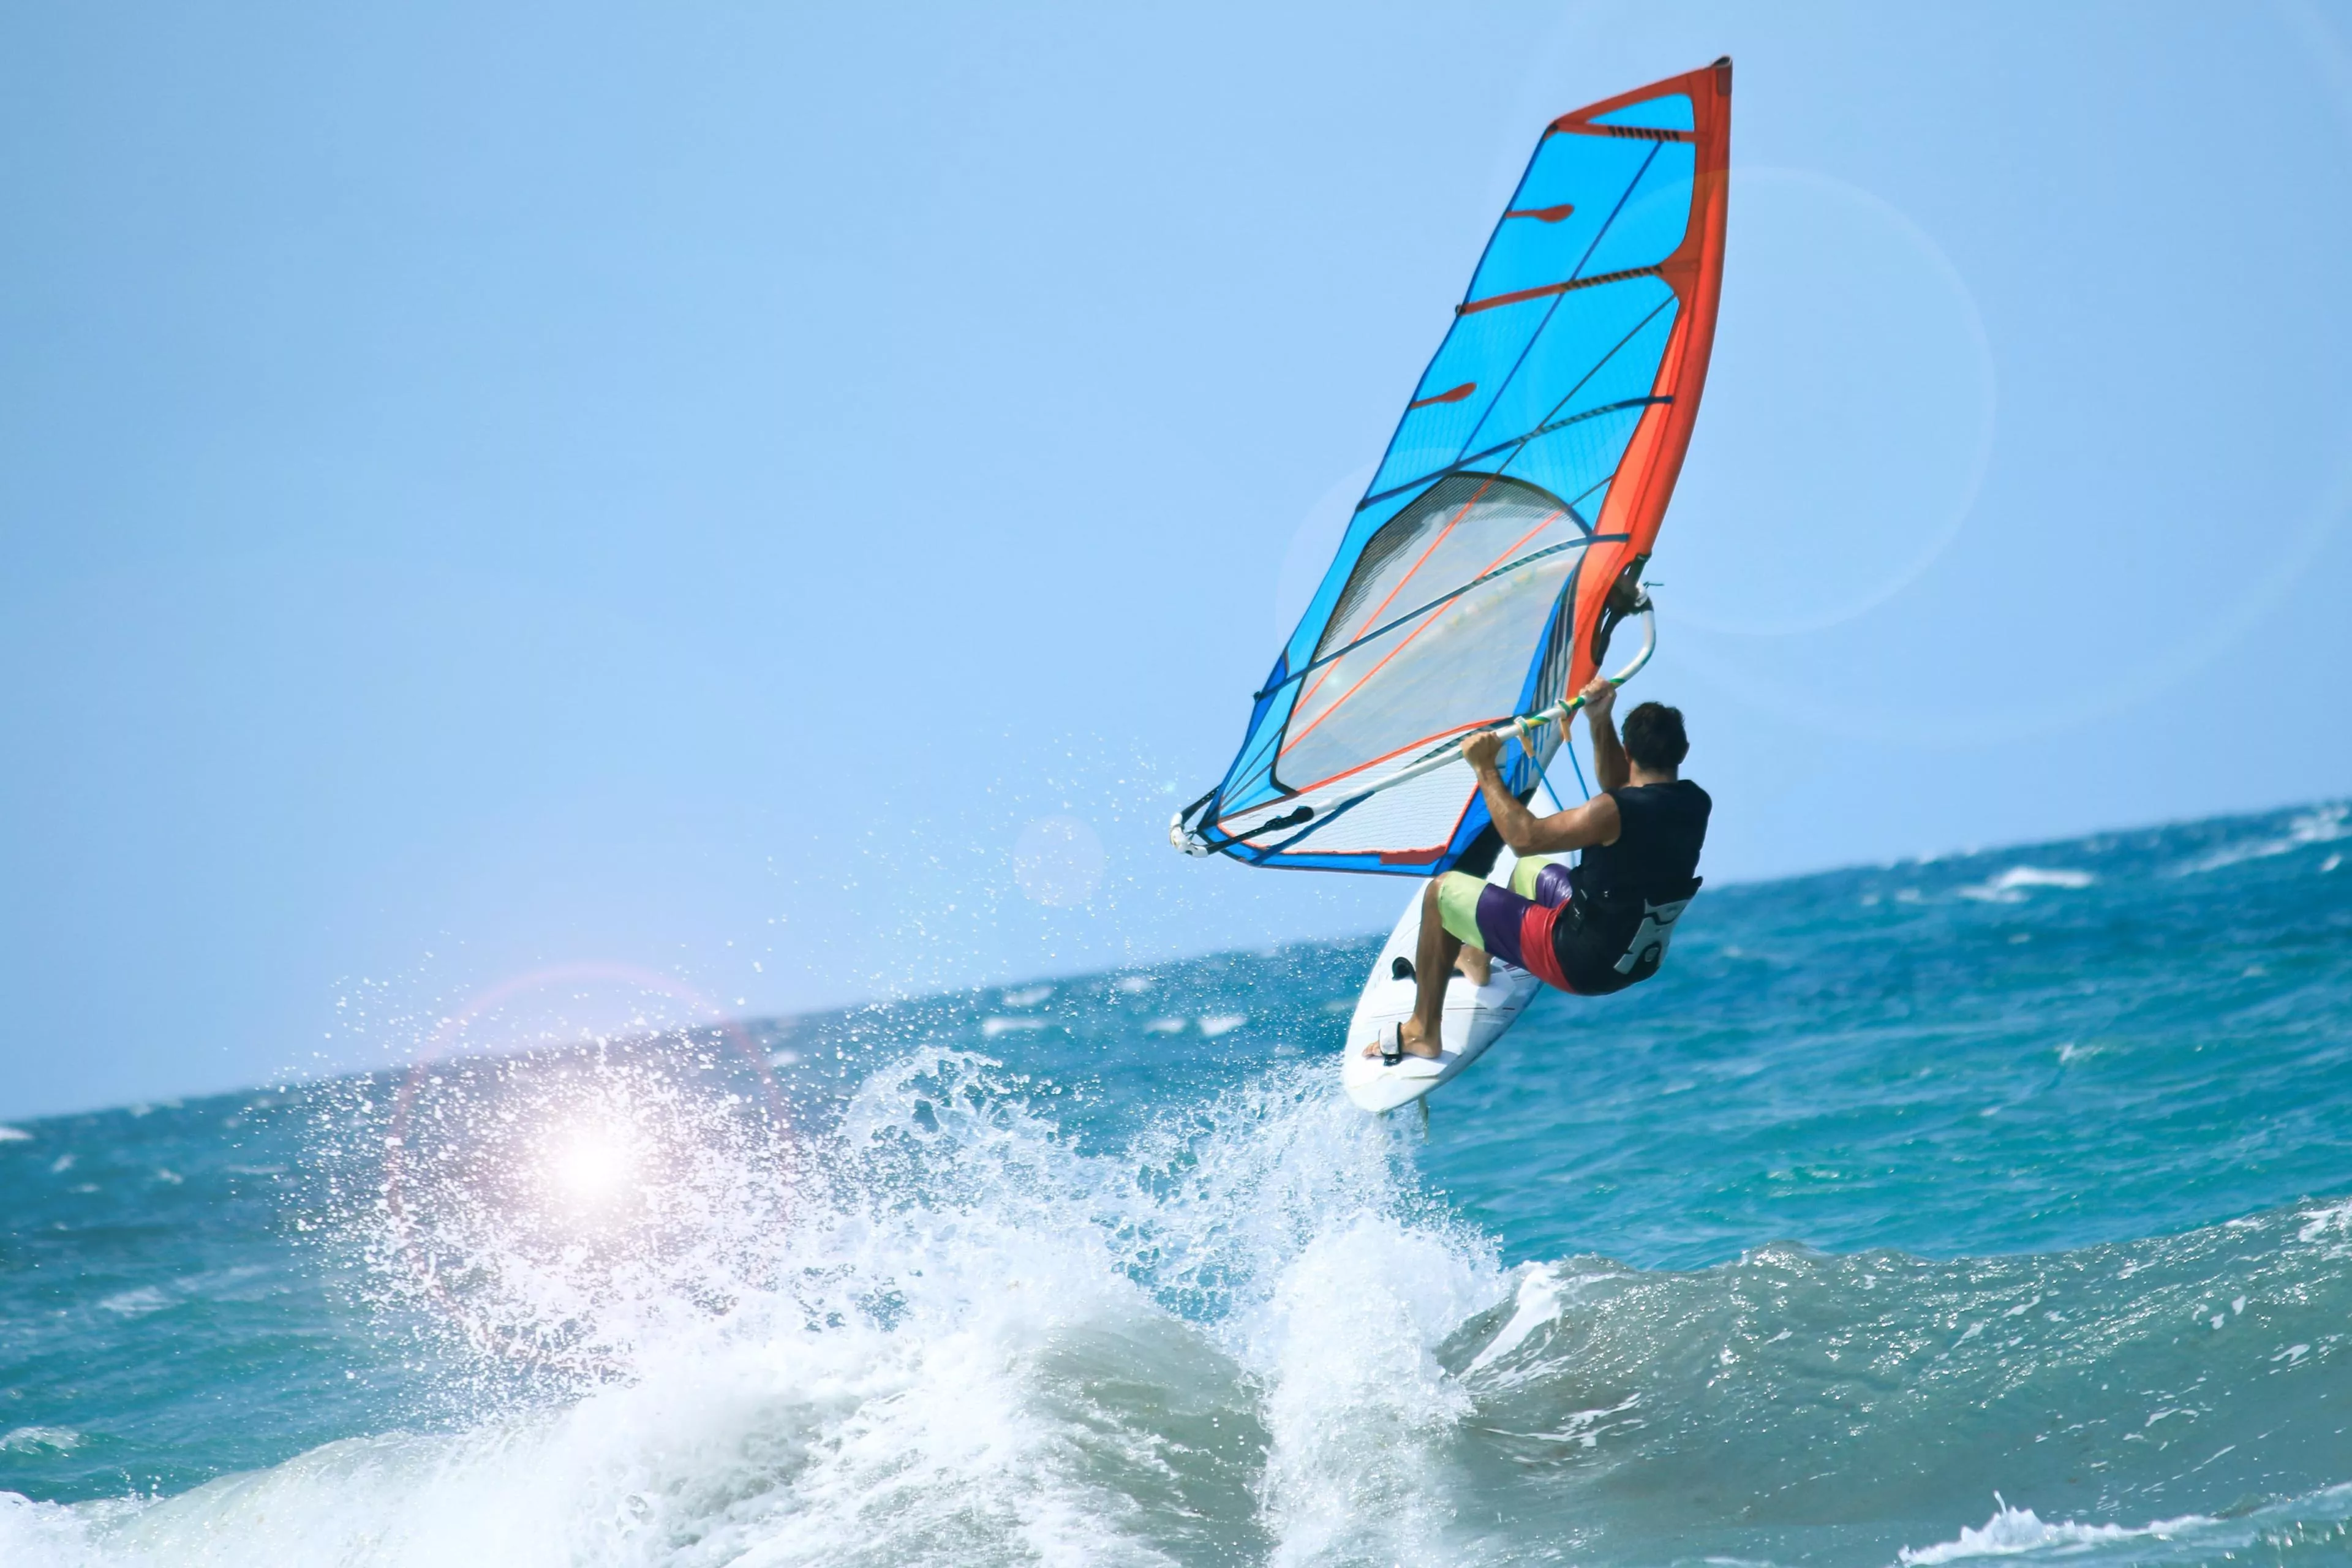 Centro Surf Monopoli in Italy, Europe | Windsurfing - Rated 1.1